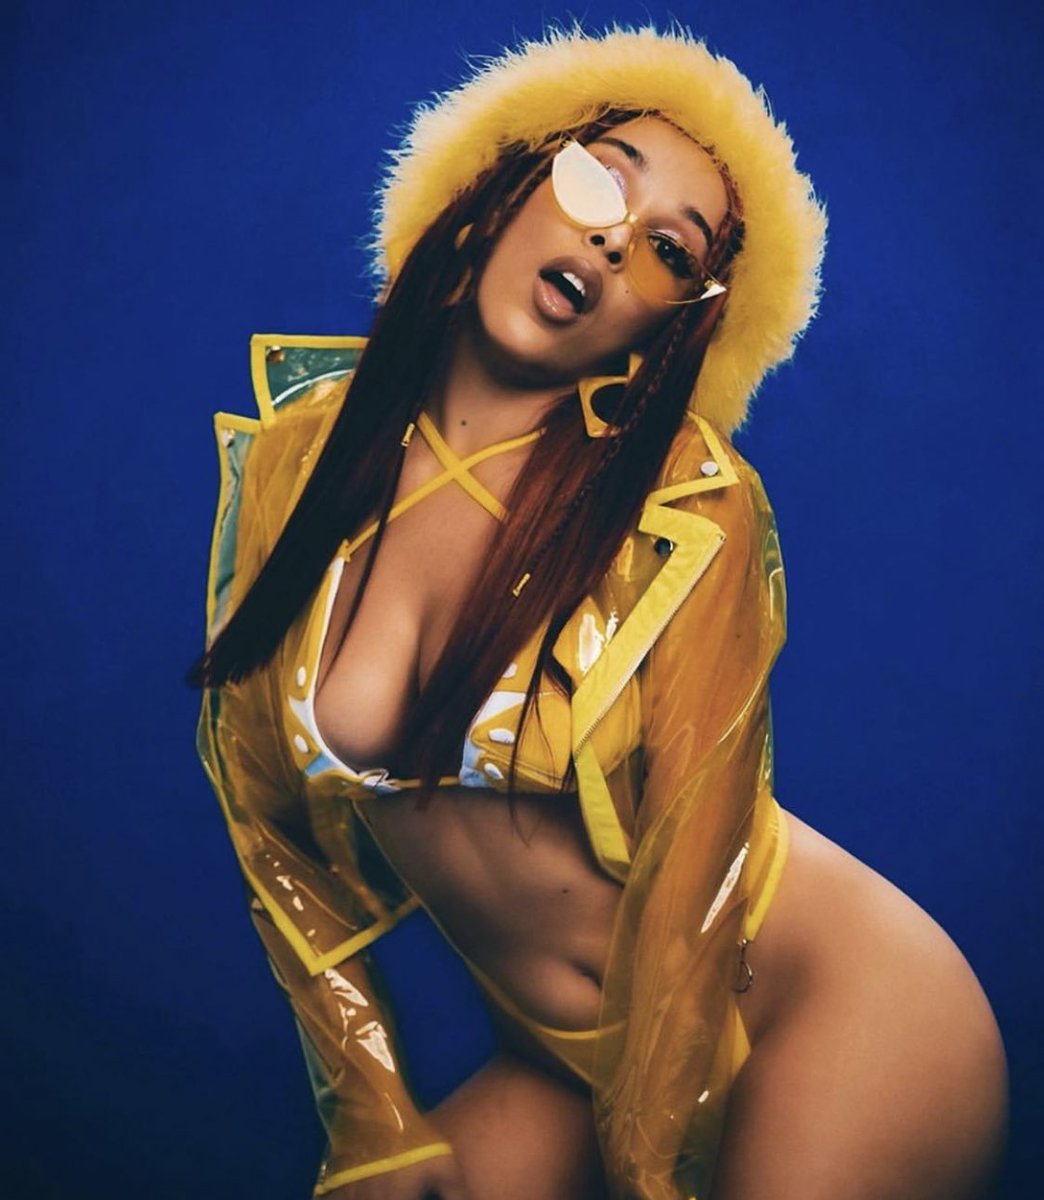 Doja Cat shares new video for Juicy remix with Tyga.